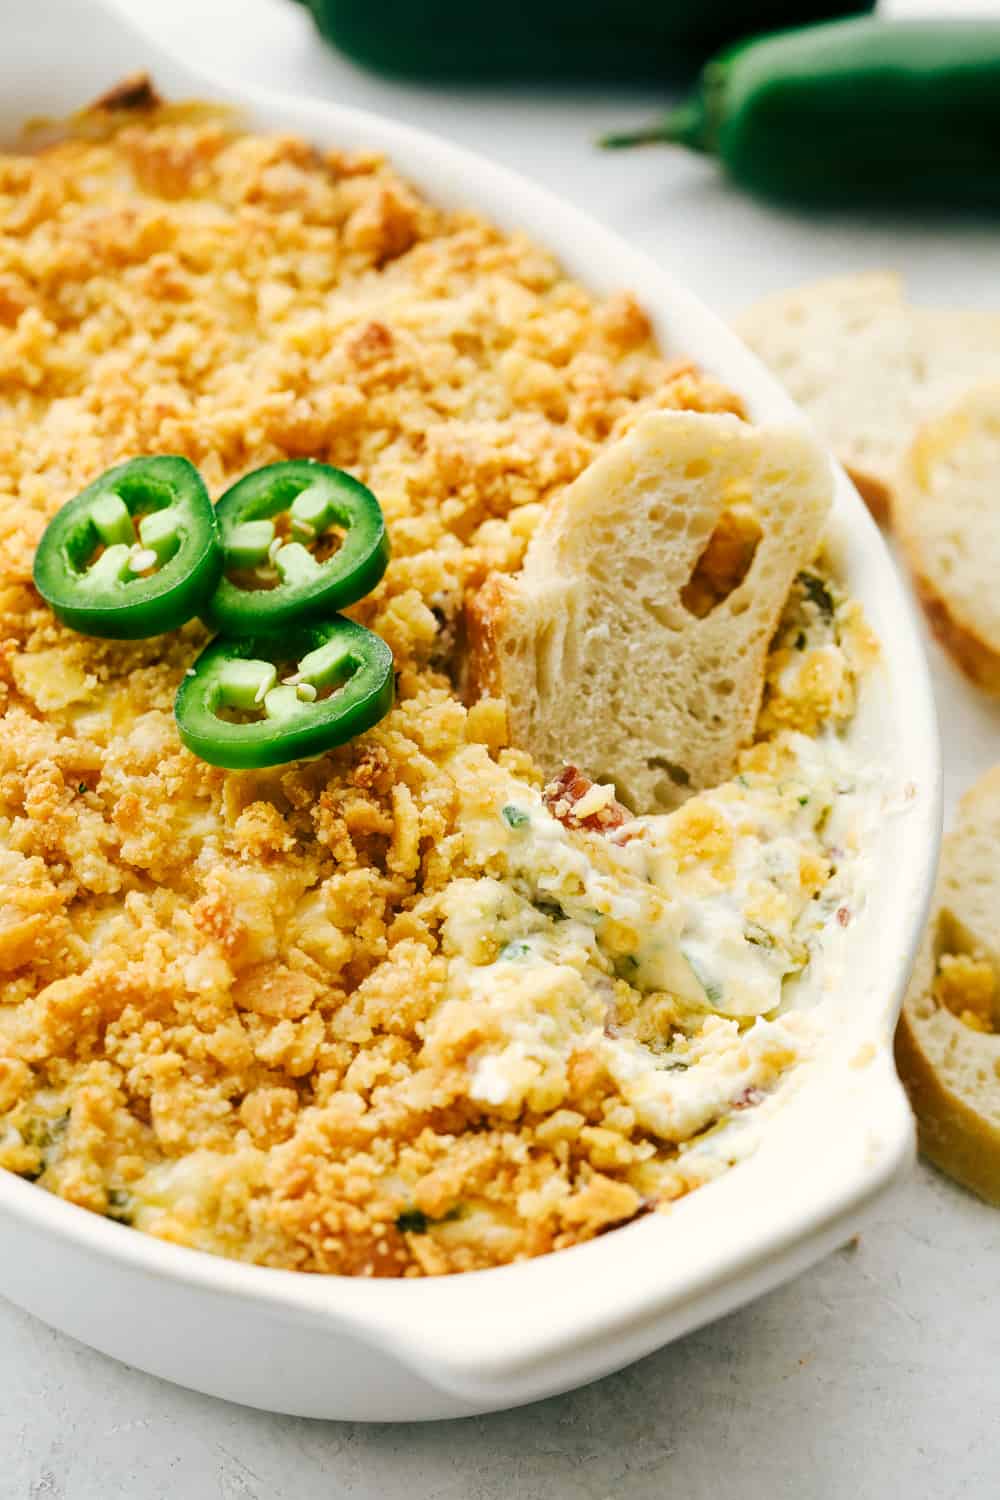 Creamy, spicy jalapeno dip with bread for dipping.